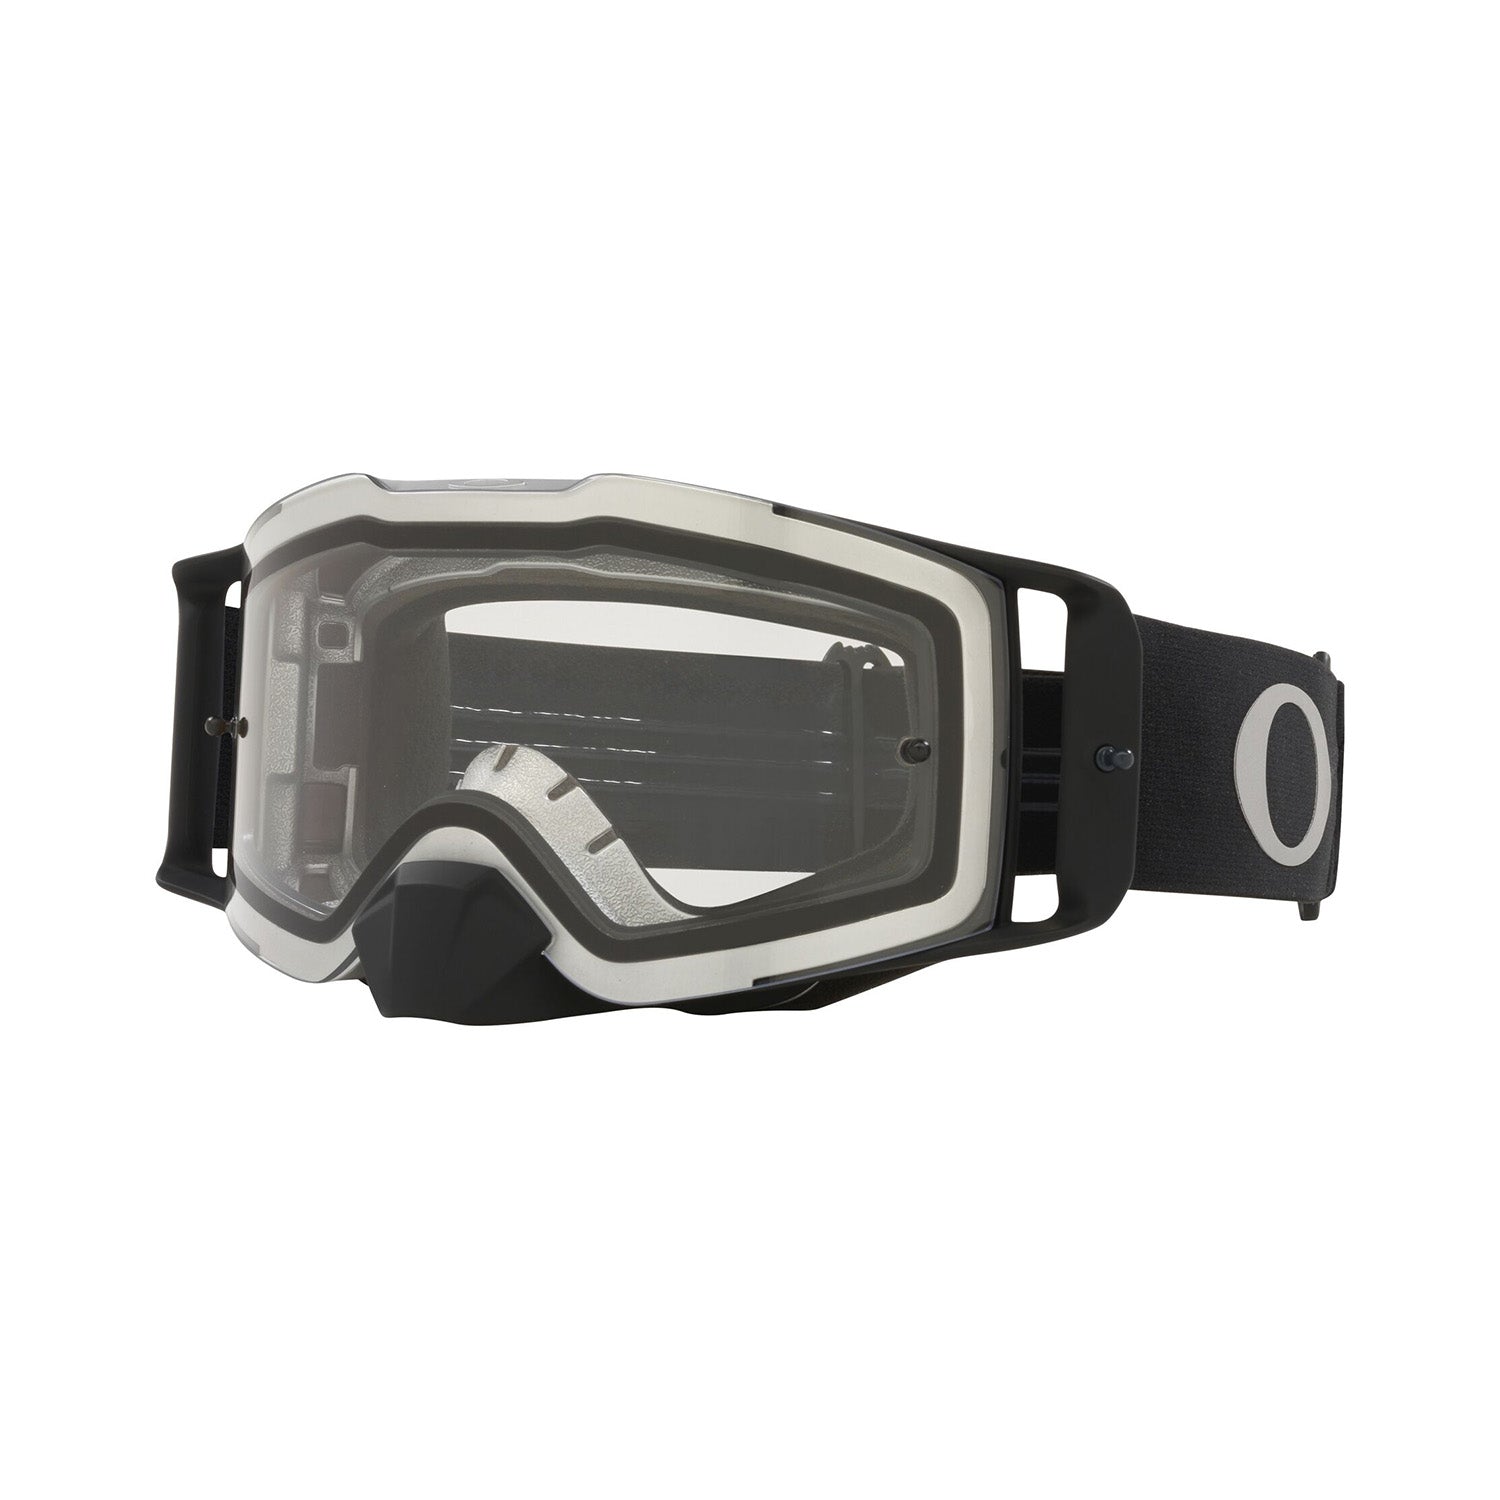 Oakley Front Line MX Goggle in Tuff Blocks Gunmetal with Clear Lens on white background.